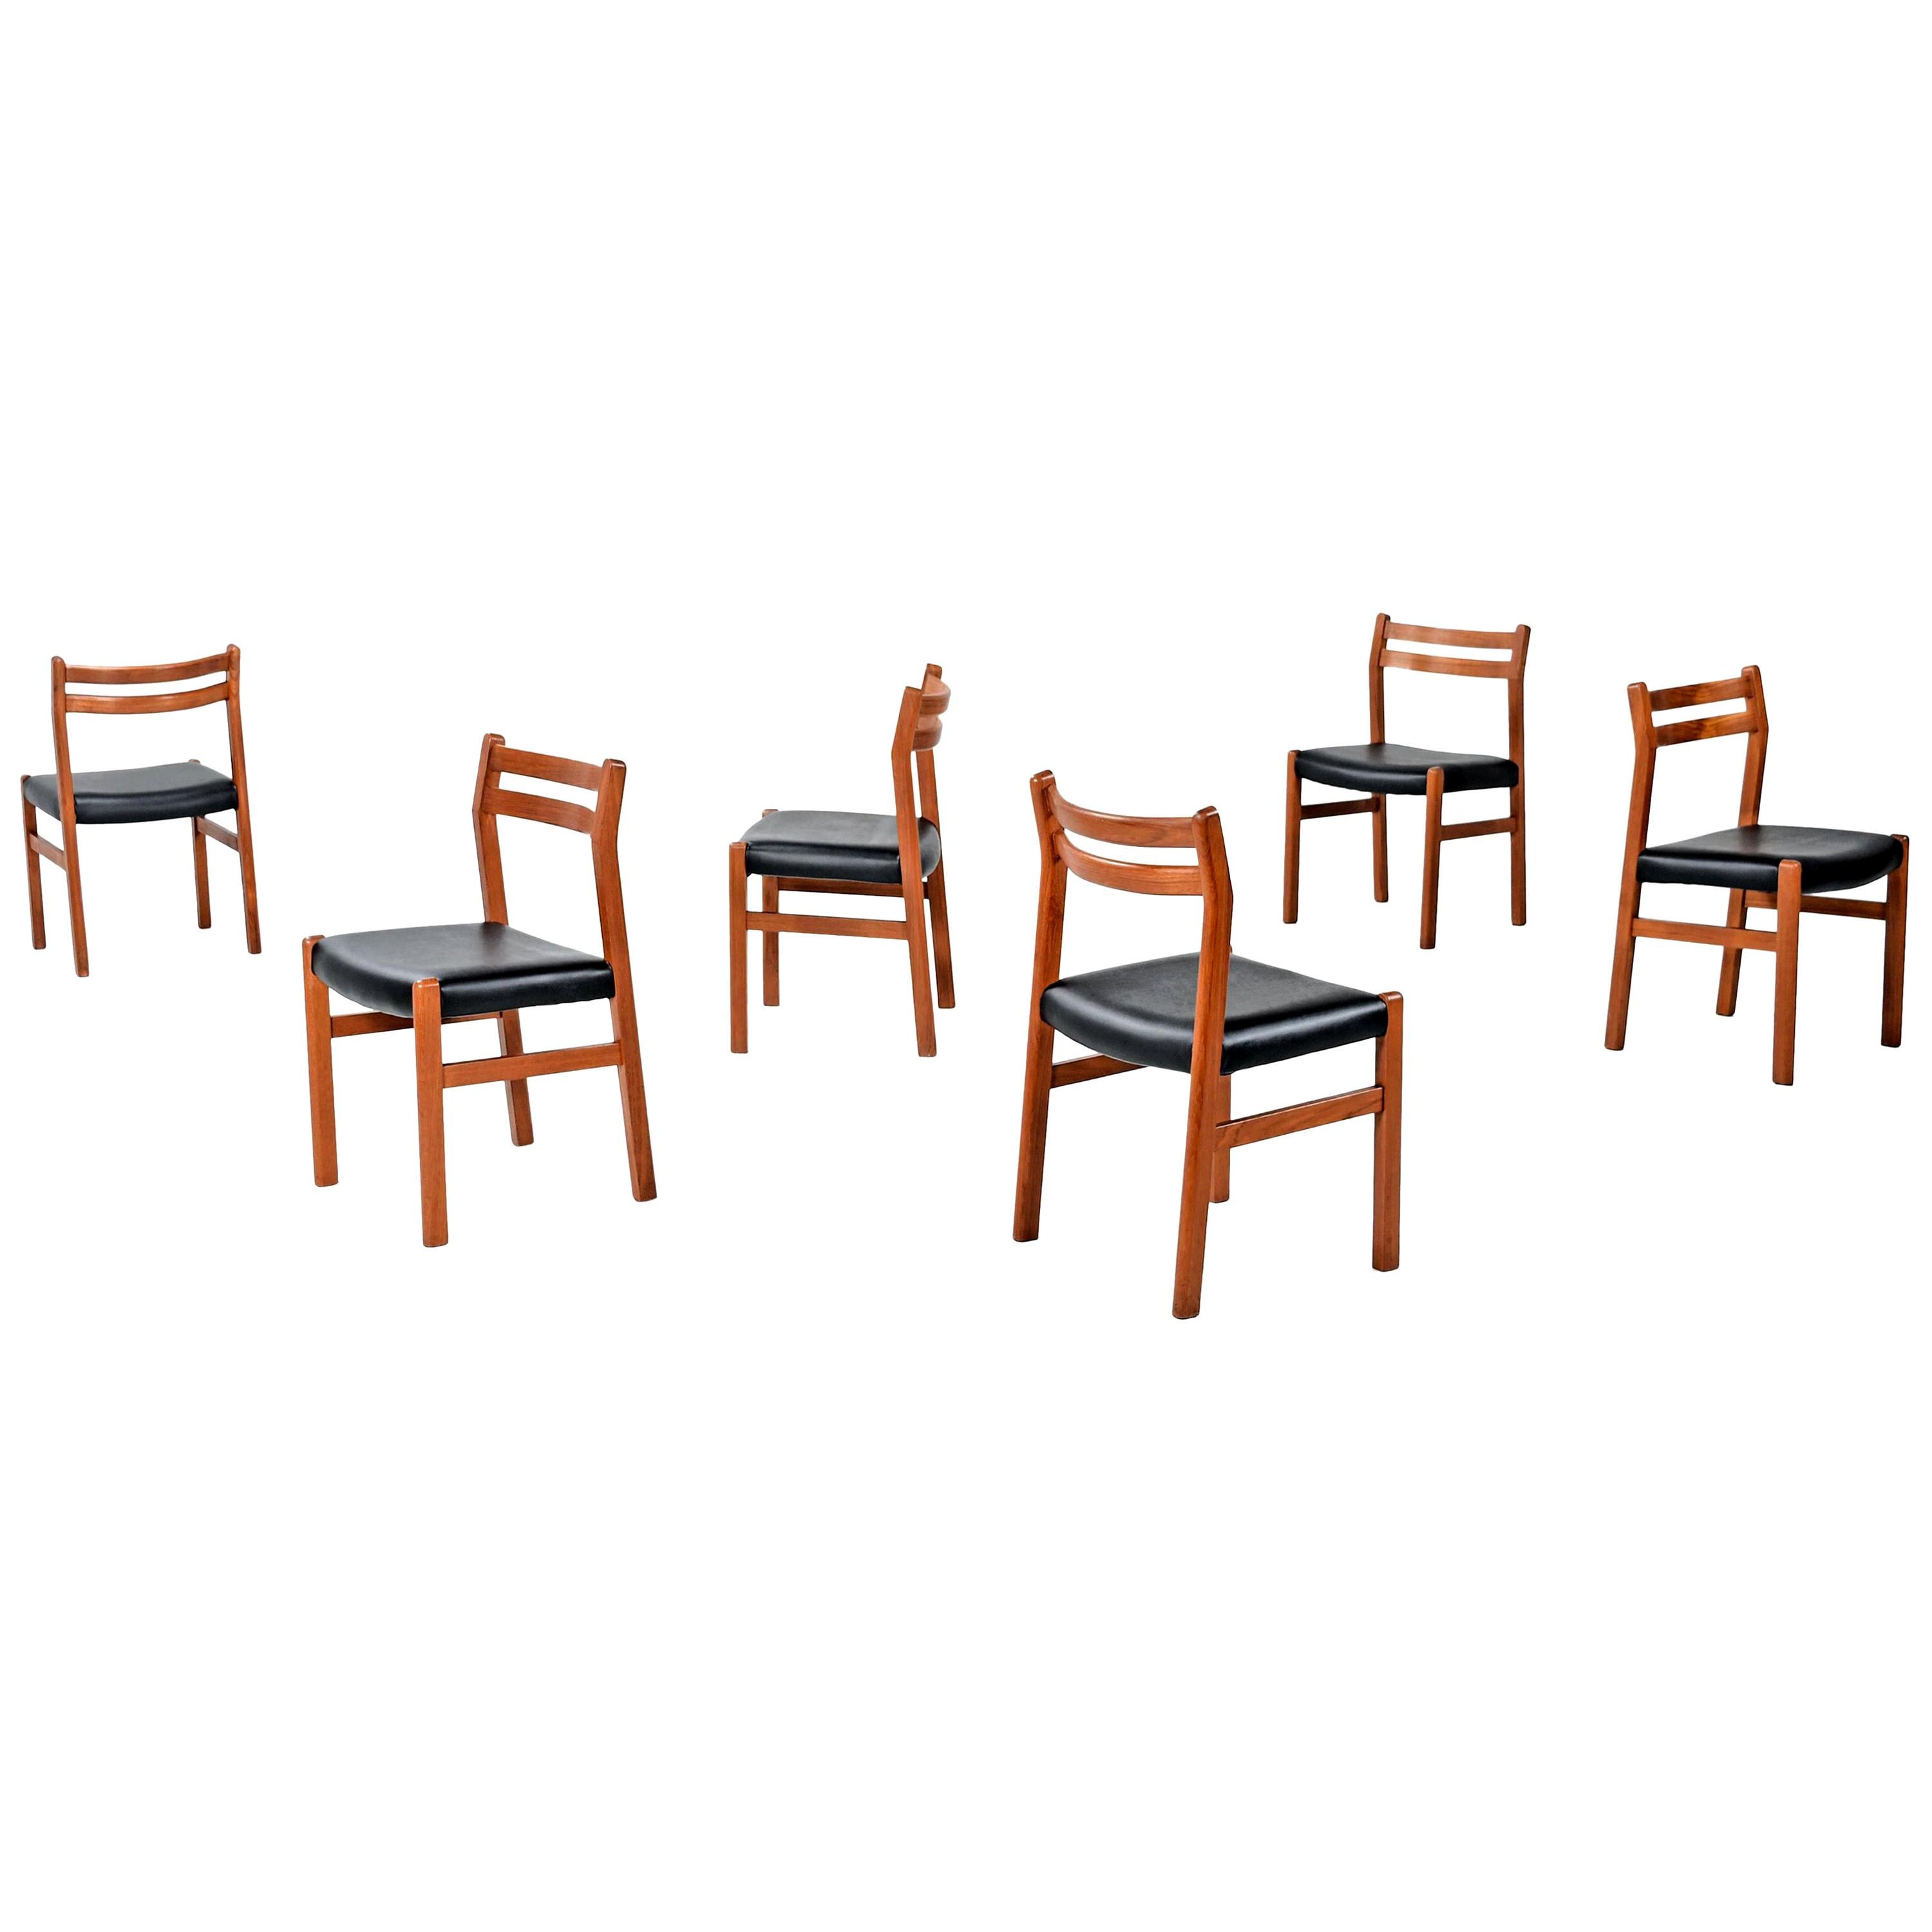 Set of 6 Solid Teak Danish Curved Back Dining Chairs, New Black Vinyl Upholstery